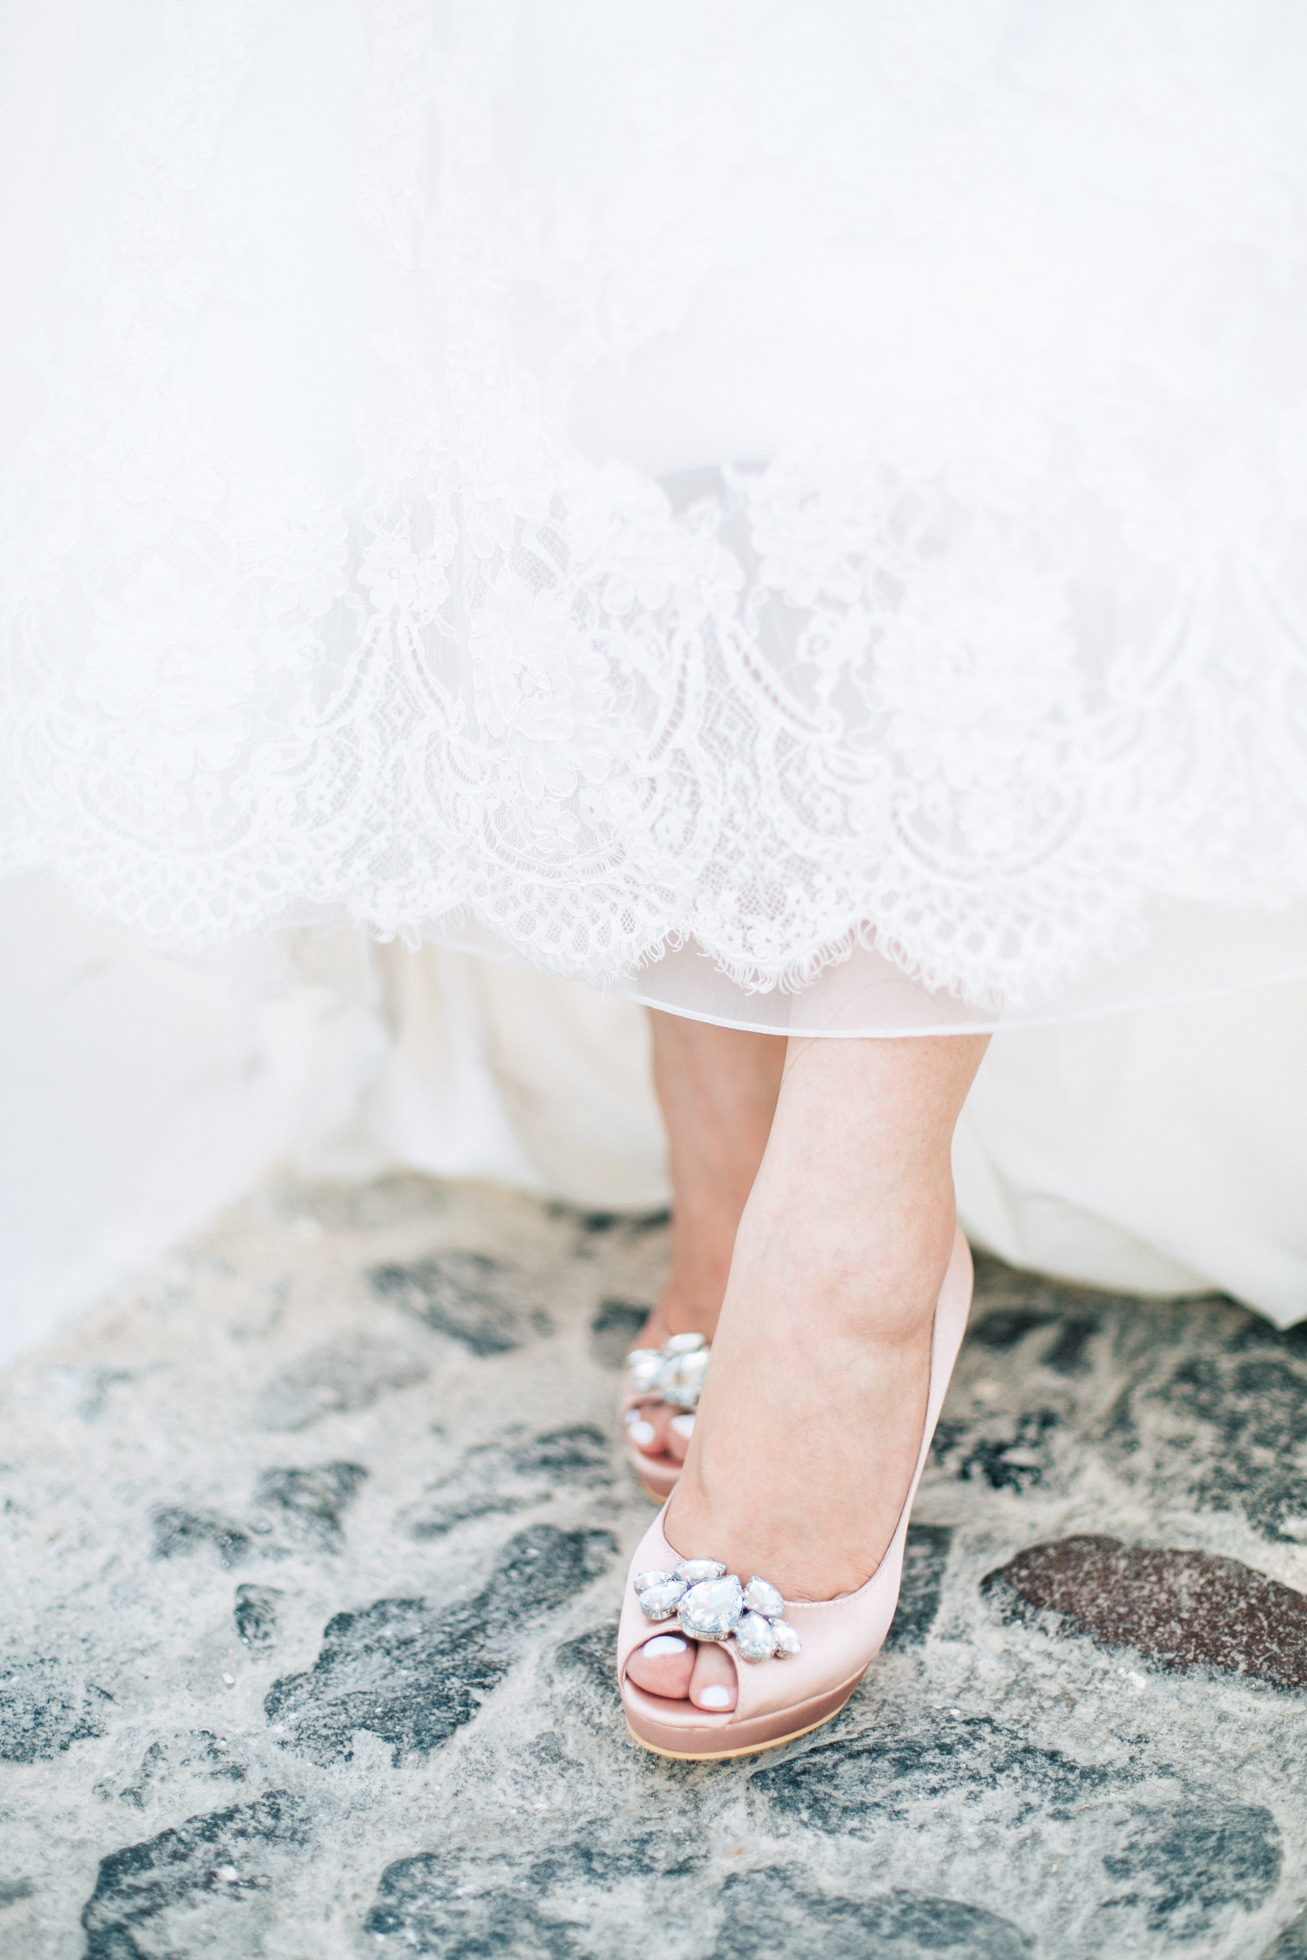 Professional Santorini wedding day photoshoot, close up photograph of bride's wedding dress and shoes while she's walking the pebbled streets of Oia. Light pink bridal shoes made by MiuMiu shoe brand.